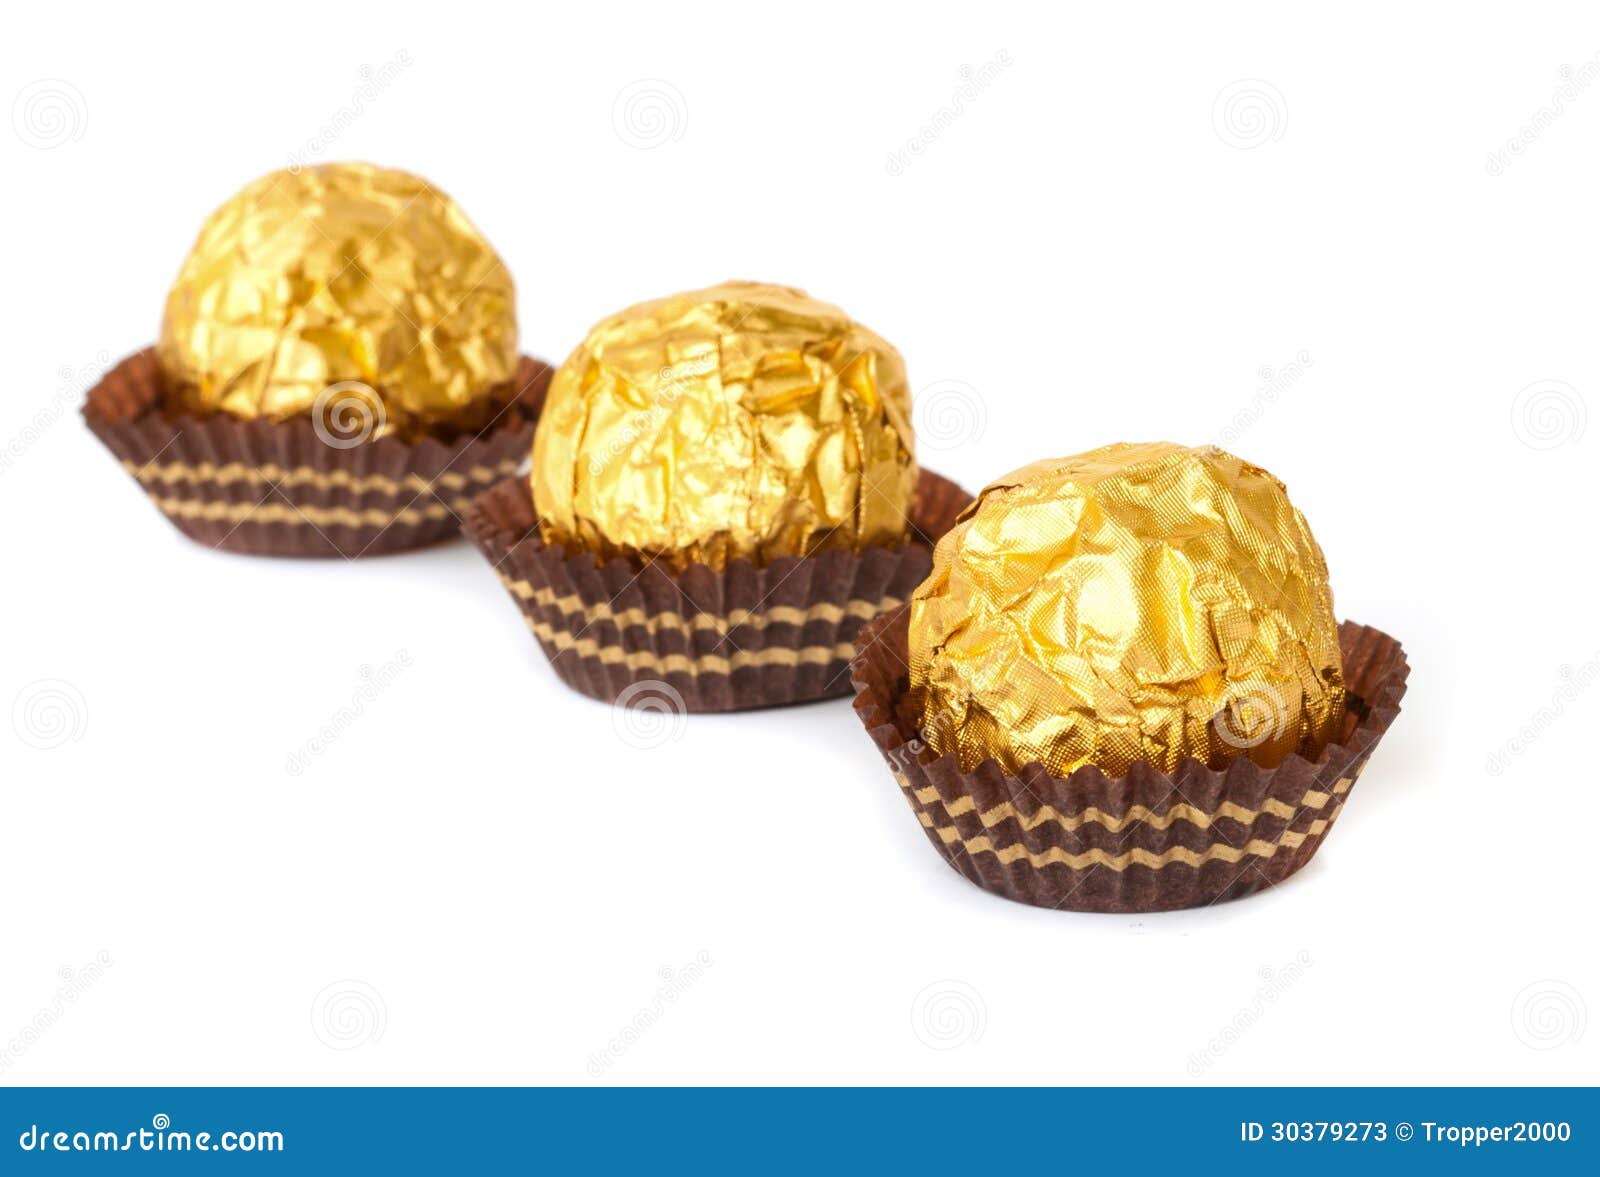 Chocolate Balls Wrapped In Gold Foil Stock Image ...